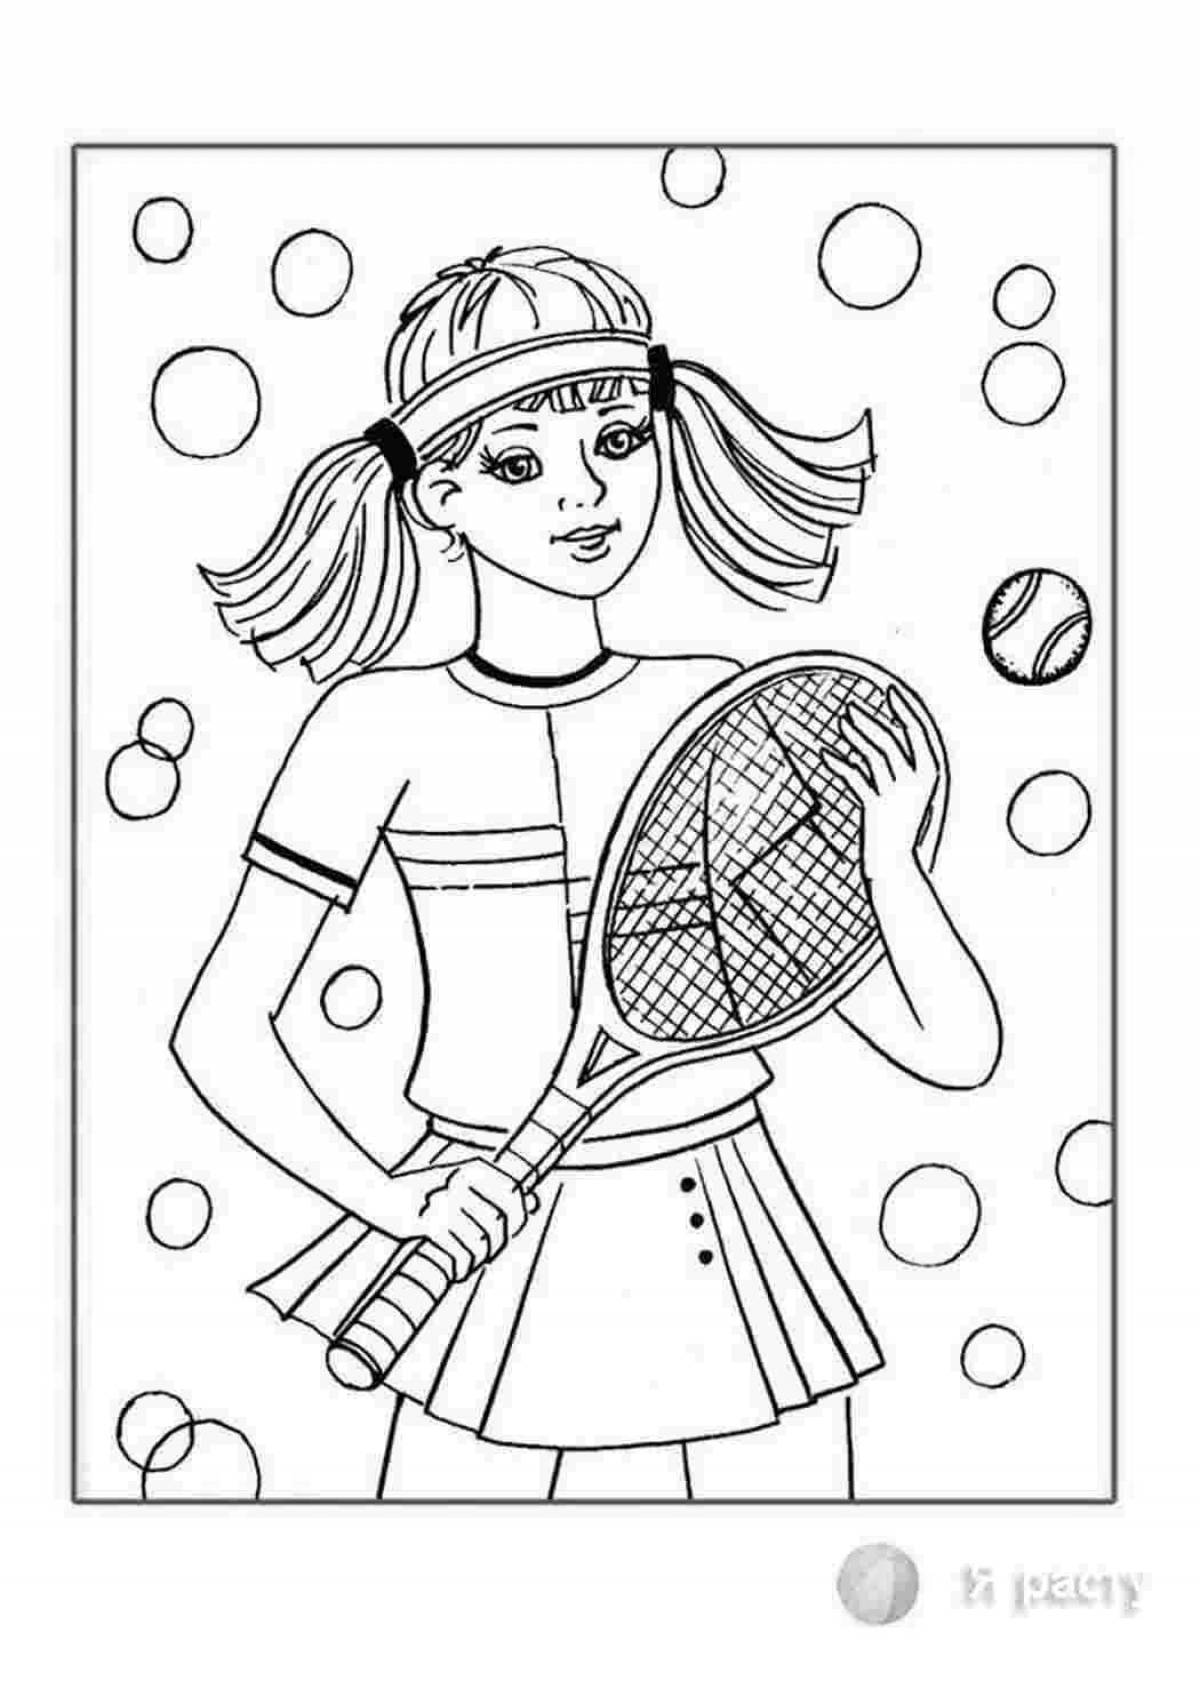 Great sports coloring book for kids 6-7 years old